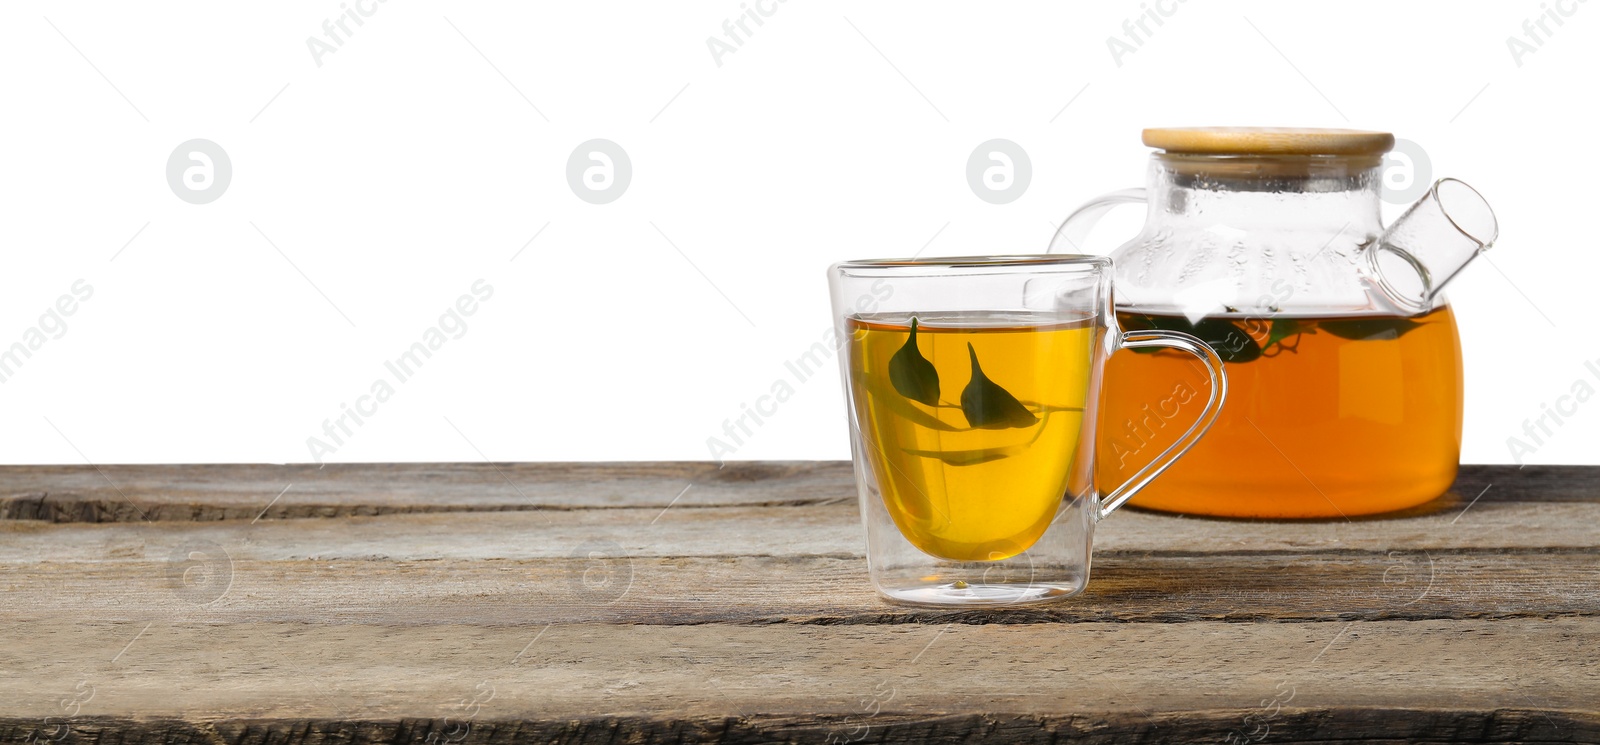 Photo of Refreshing green tea in cup and teapot on wooden table against white background